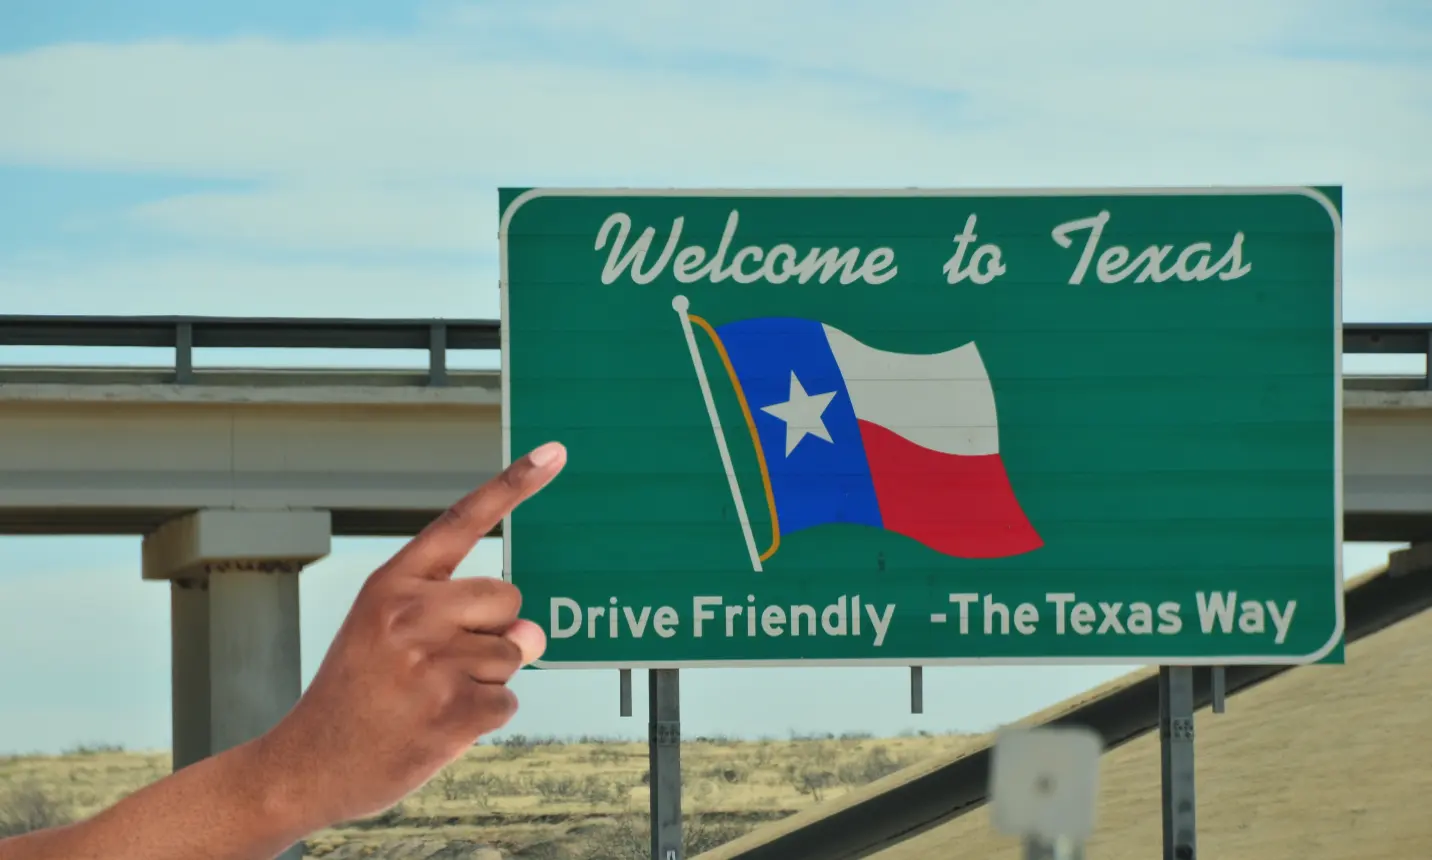 A sign post welcoming people to Texas